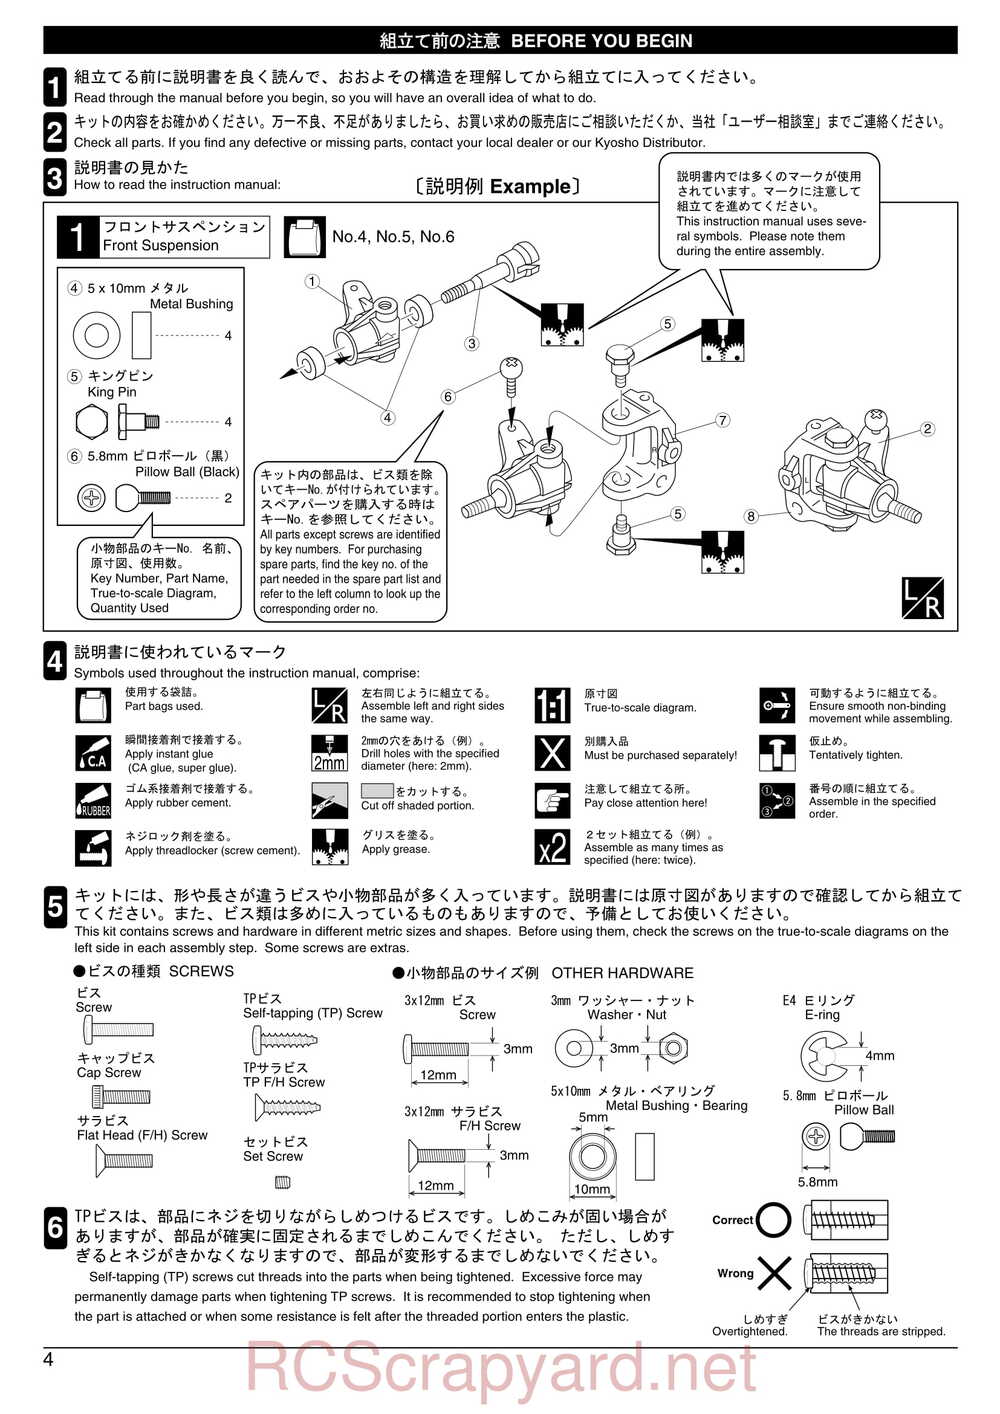 Kyosho - 31011 - V-One R - Manual - Page 04